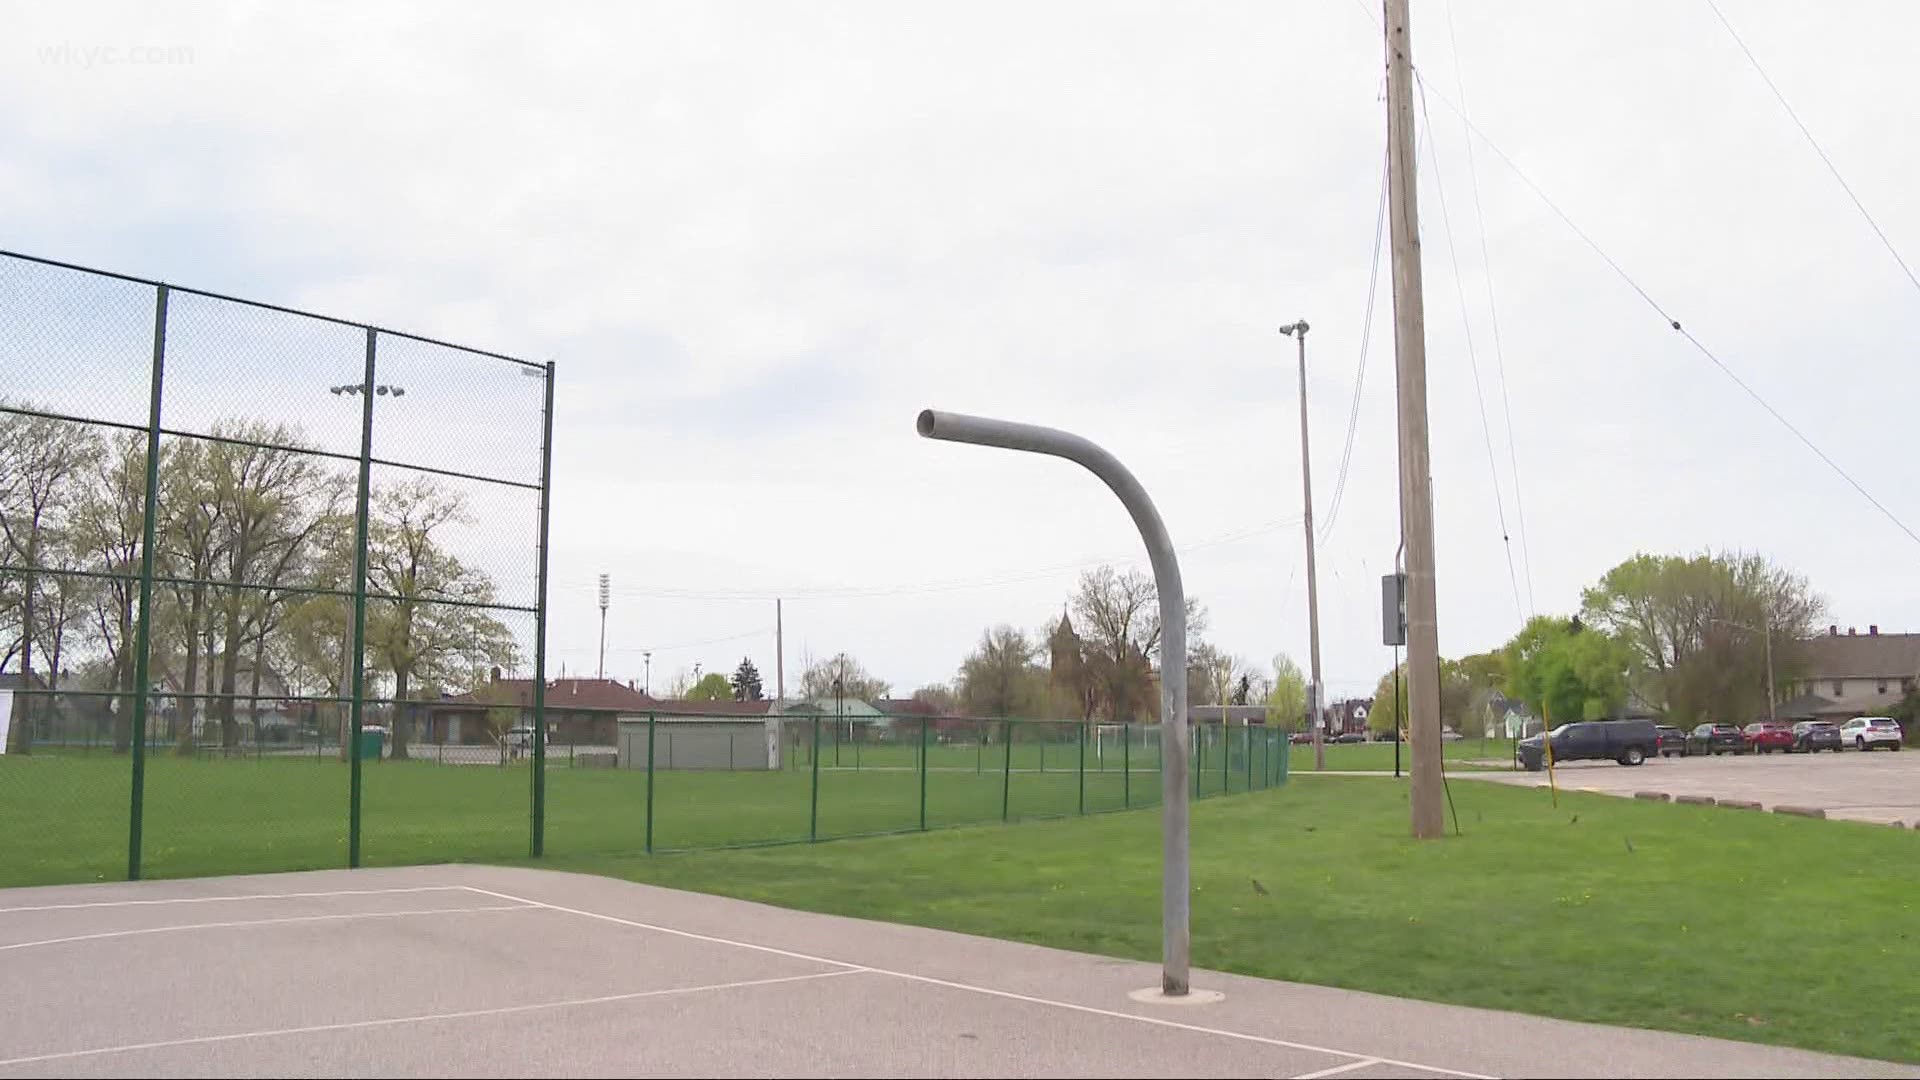 Lakewood residents raise questions after basketball hoops removed wkyc